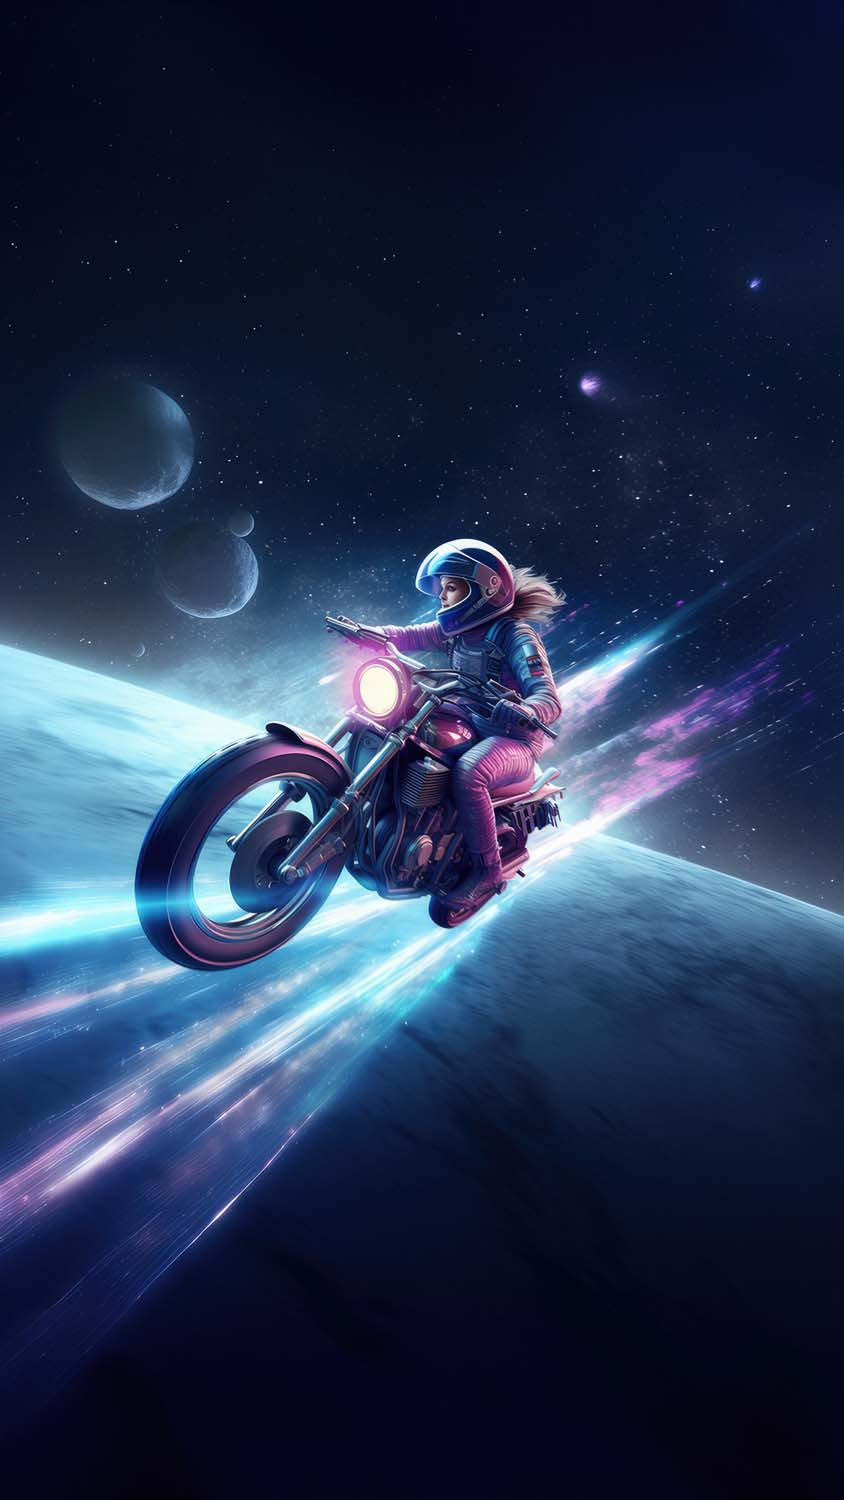 Space Rider iPhone Wallpaper 4K  iPhone Wallpapers